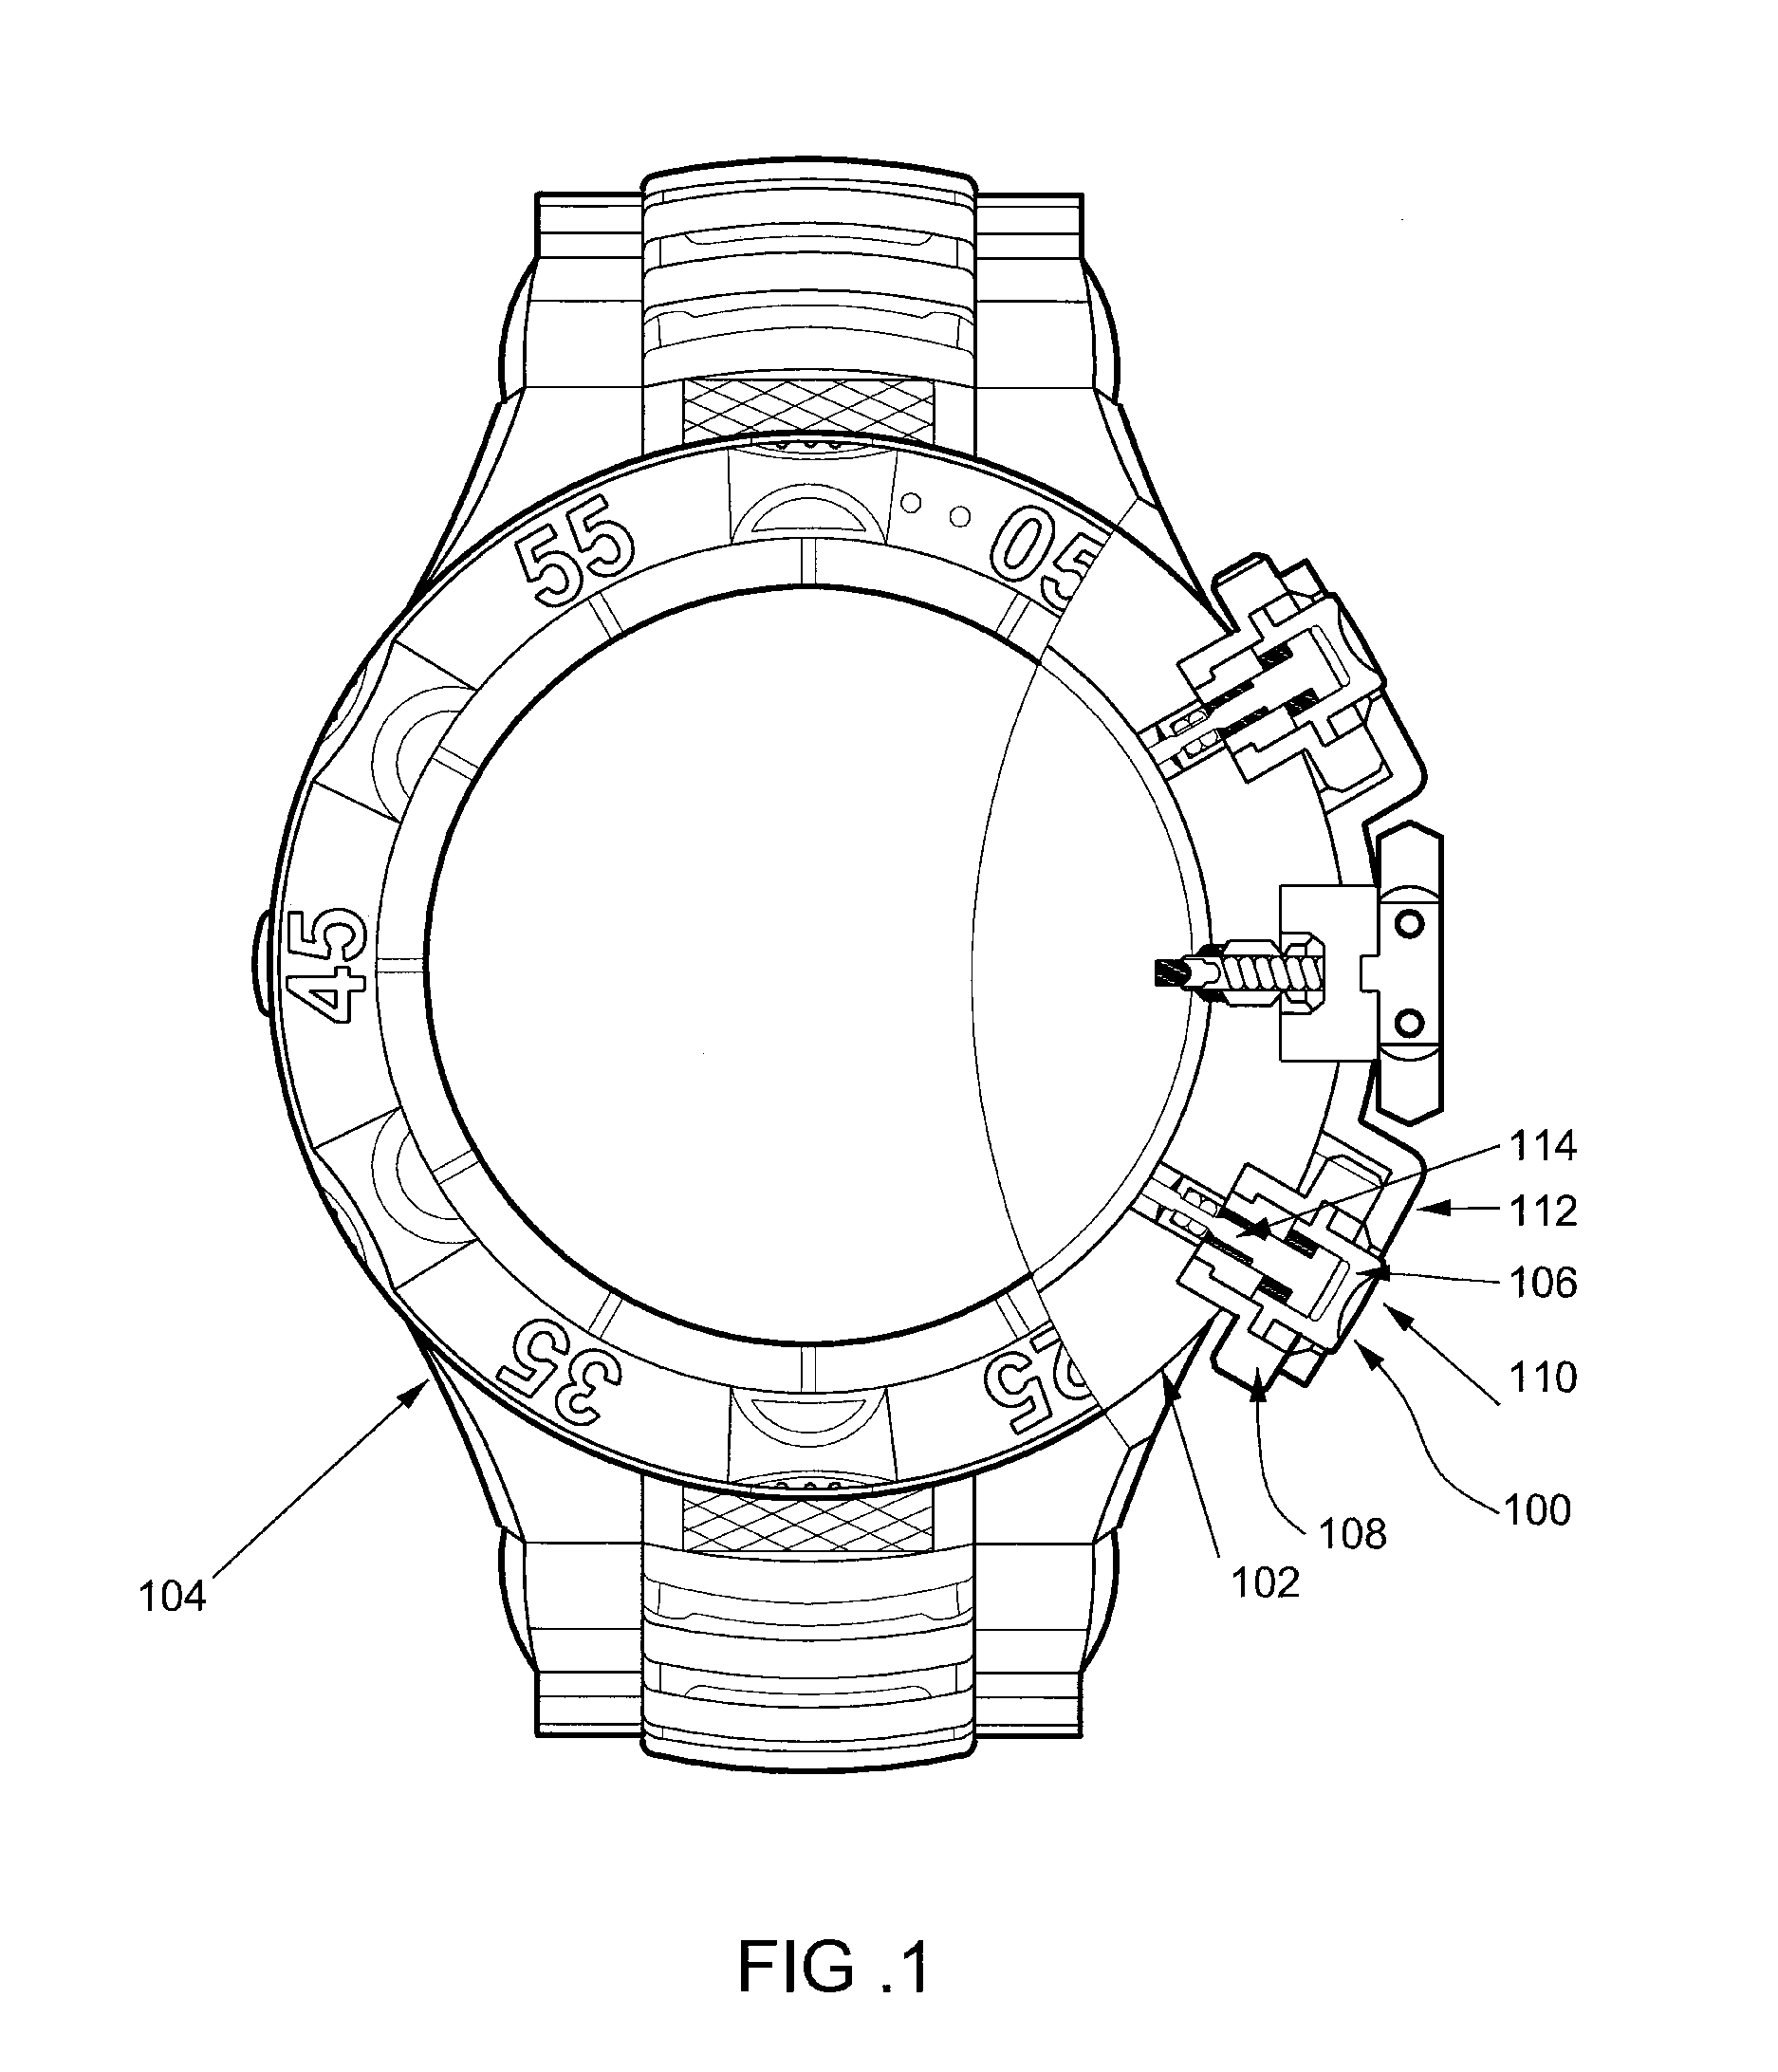 Interface for actuating a device